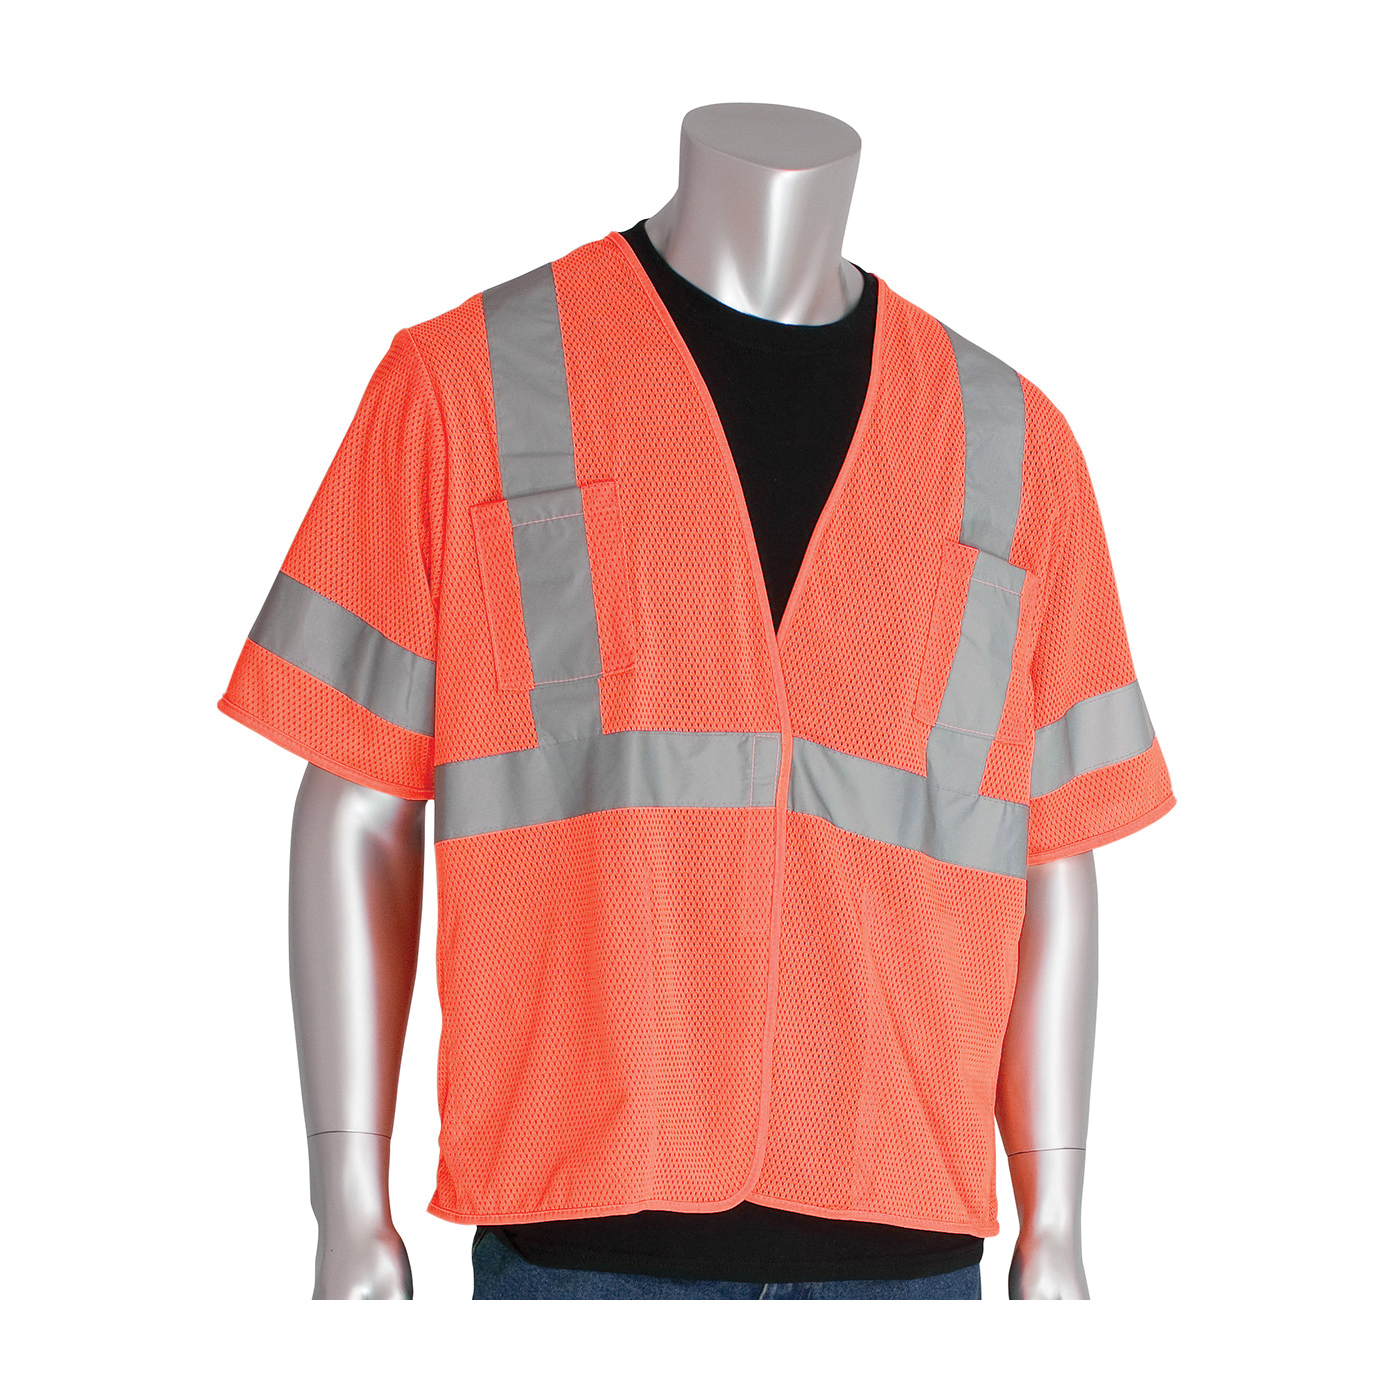 PIP® 303-HSVEOR-M Safety Vest, M, Hi-Viz Orange, Polyester Mesh, Hook and Loop Closure, 4 Pockets, ANSI Class: Class 3, Specifications Met: ANSI 107 Type R